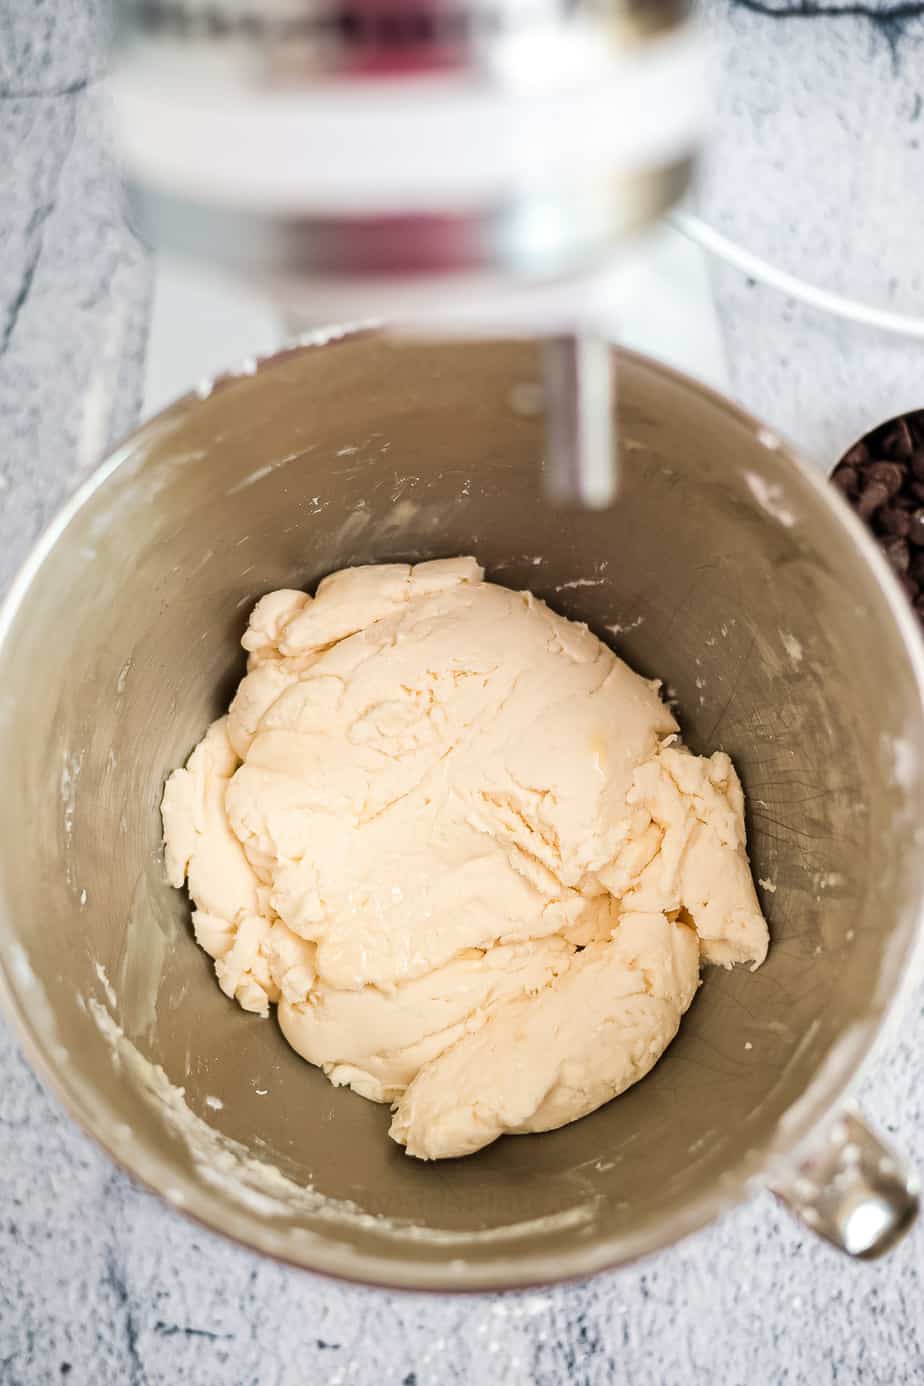 Dough mixed in the bowl of a stand mixer from overhead